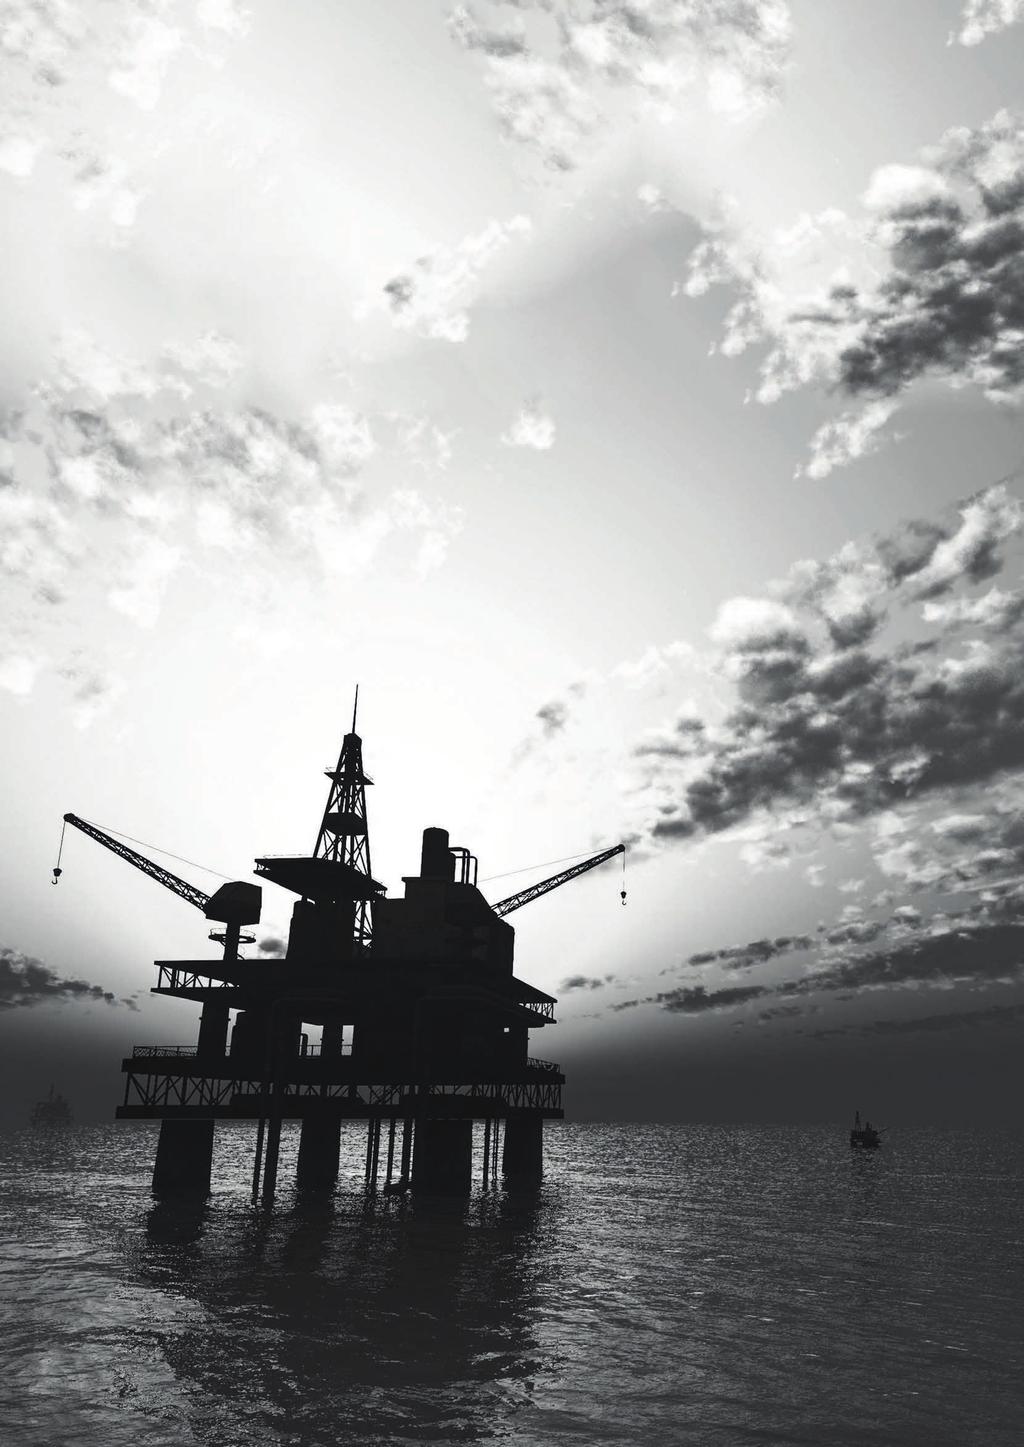 Next Generation Oilfield Solutions FrontRow encompasses a number of complementary businesses delivering innovative and cost-effective solutions that enable the global oil and gas industry to meet